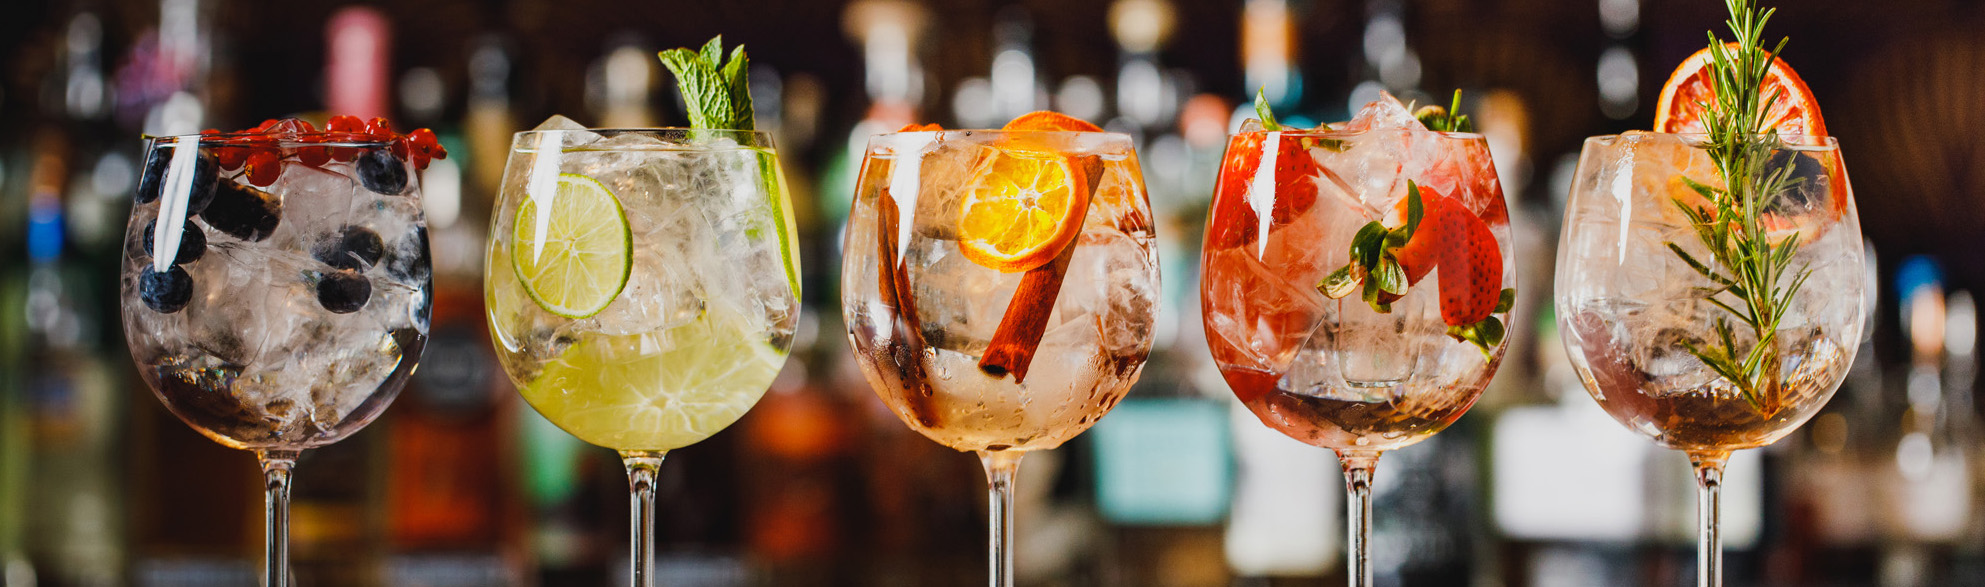 20 of the best cocktail pitchers, punch jugs & gin decanters — Craft Gin  Club